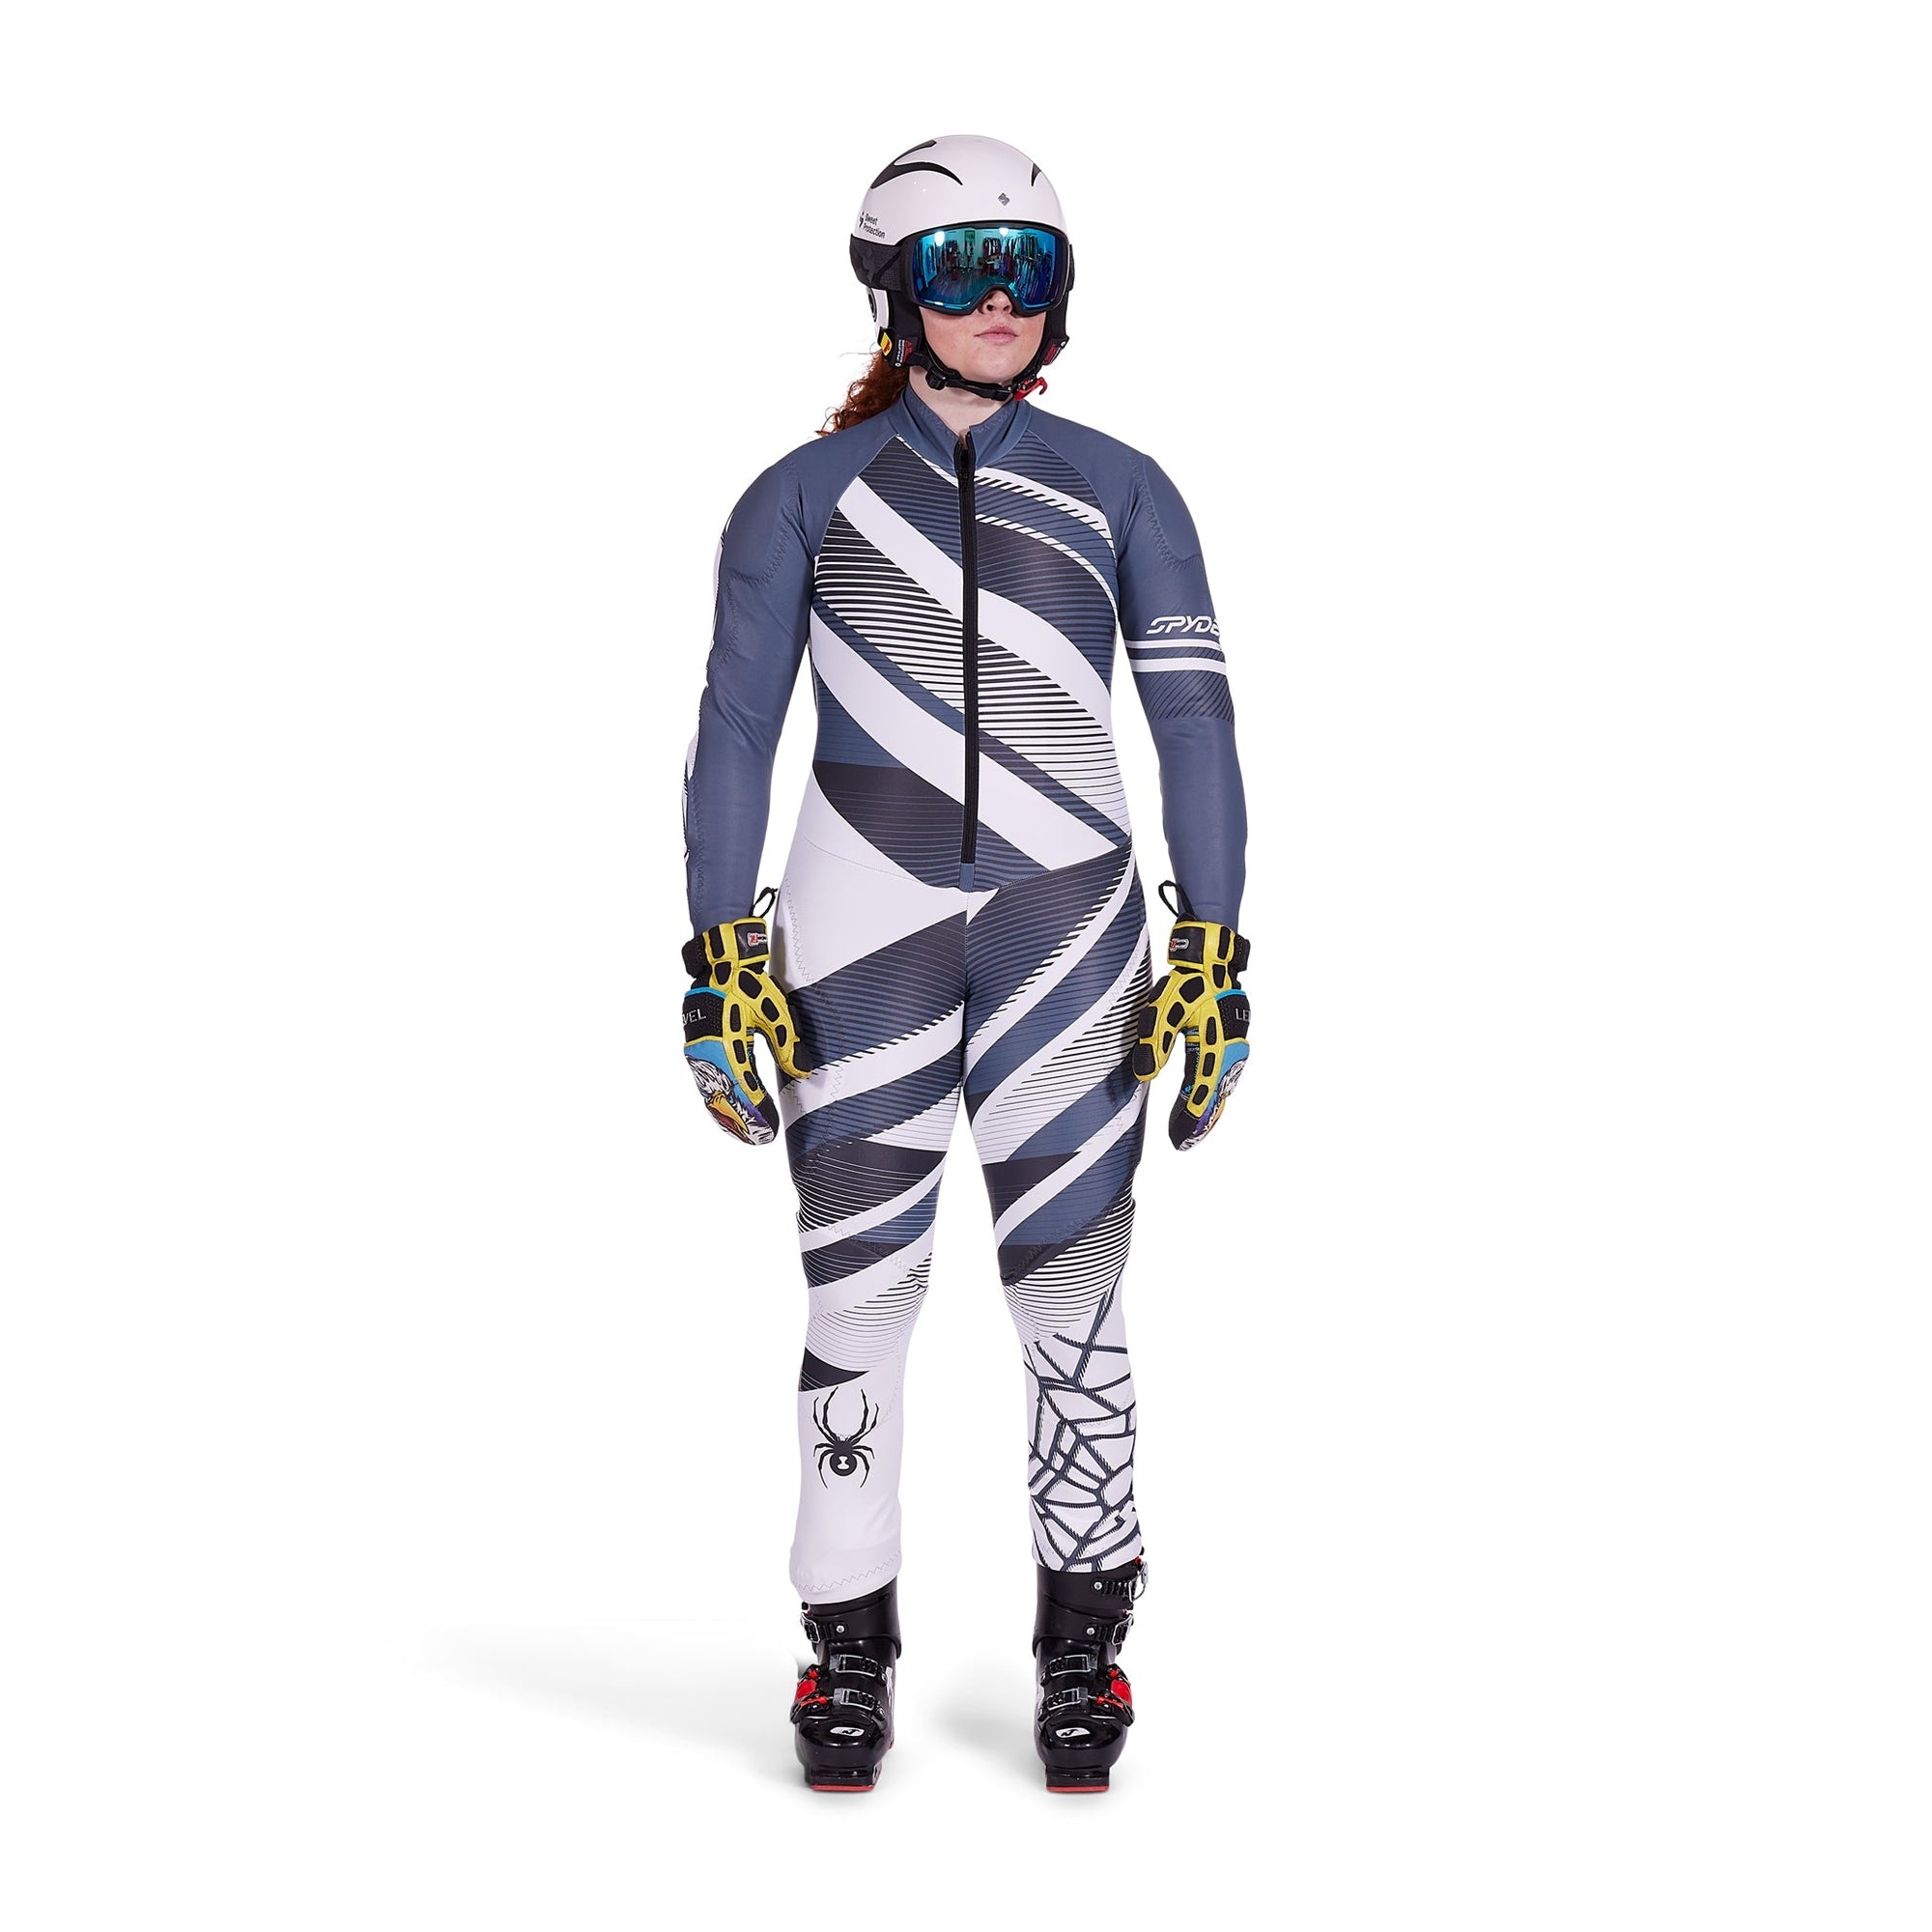 Spyder Shares Detail On Tech' In USST Speed Suit